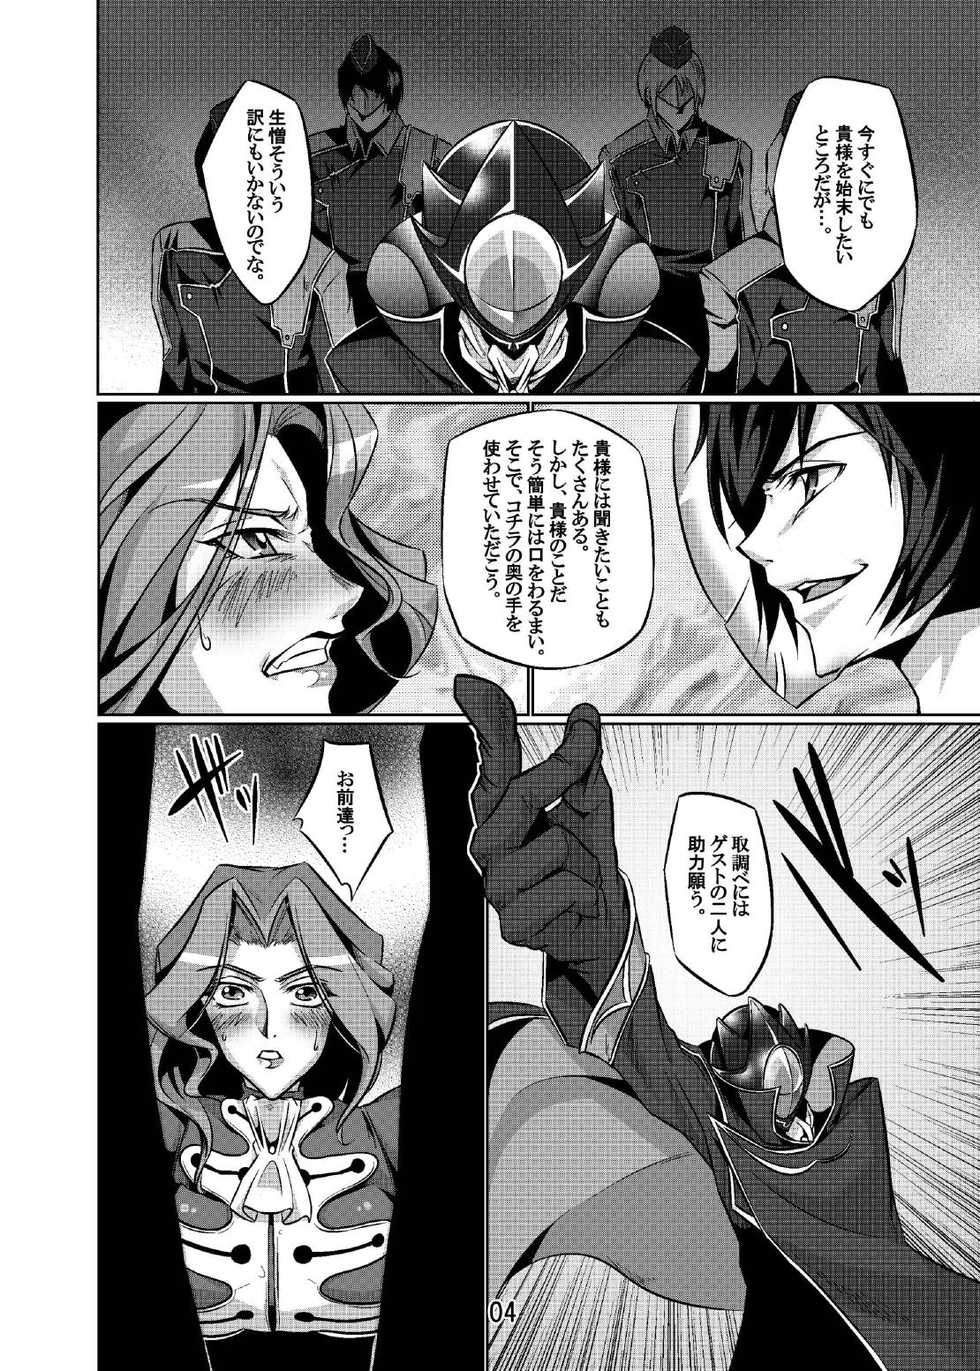 [juvecross (Karamai)] The Elegance of Yellow Roses (Code Geass: Lelouch of the Rebellion) [Digital] - Page 4